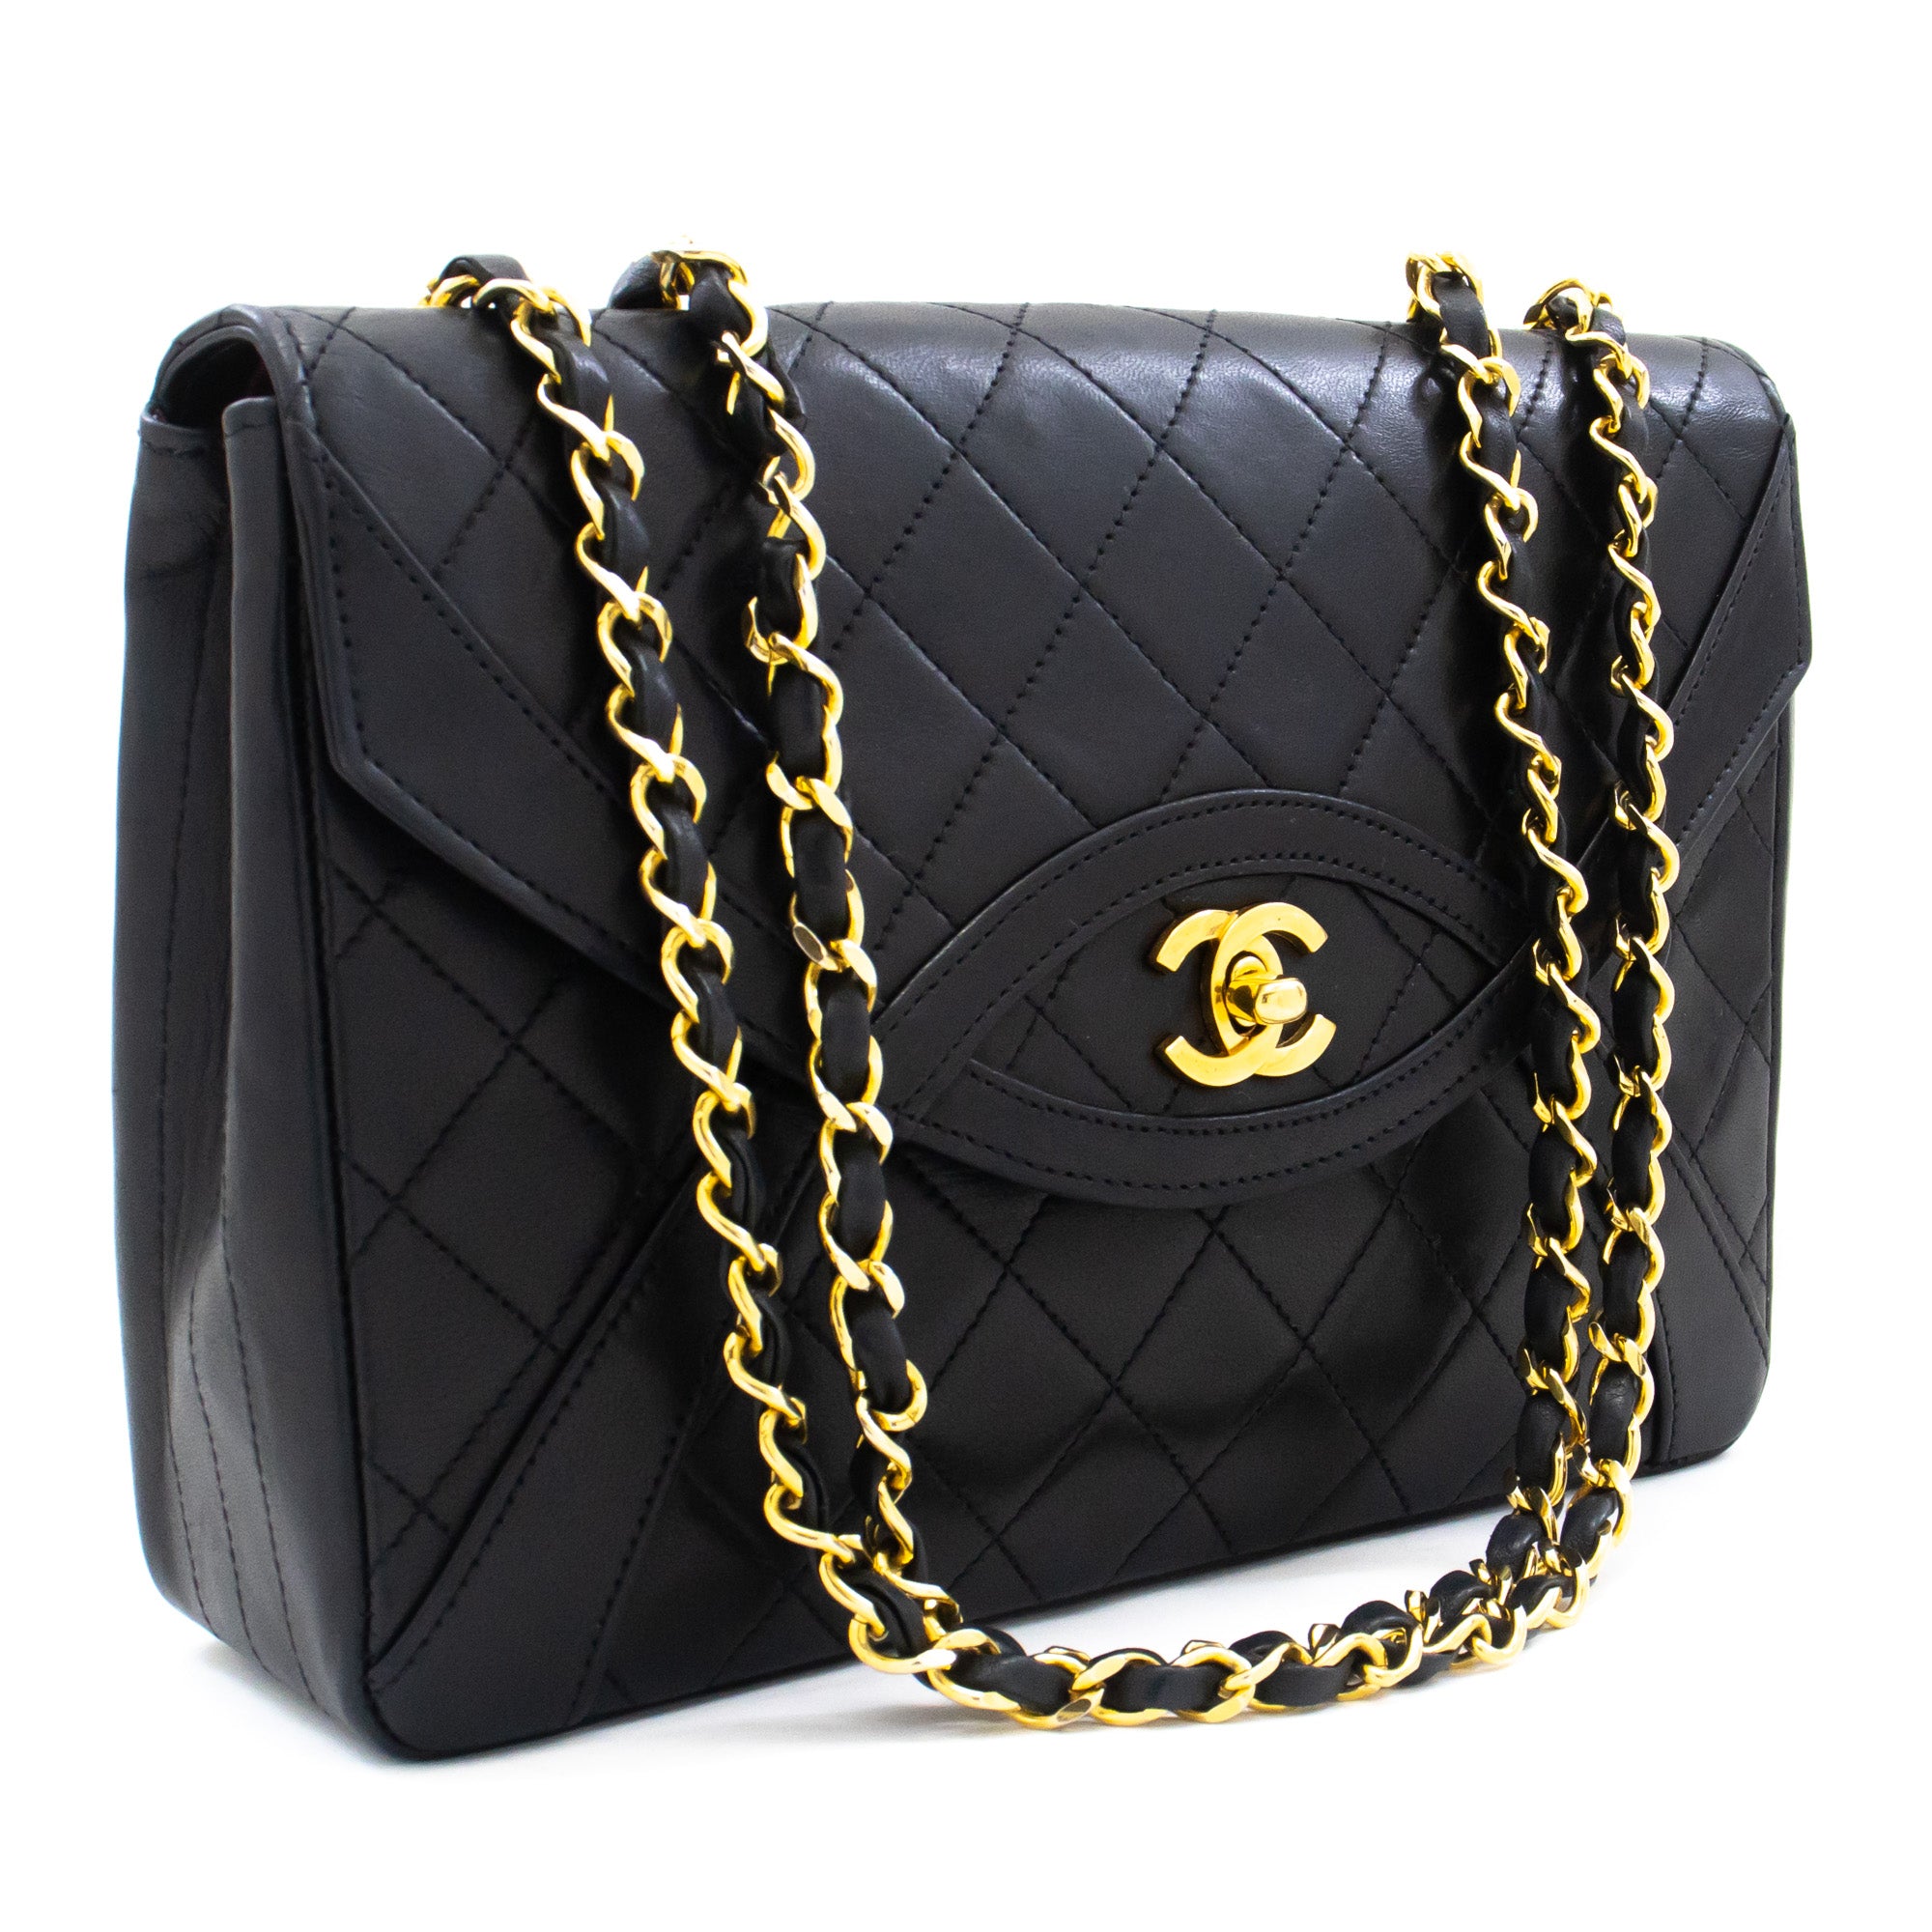 Chanel White Quilted Caviar Leather Jumbo Vintage Classic Single Flap Bag  Chanel